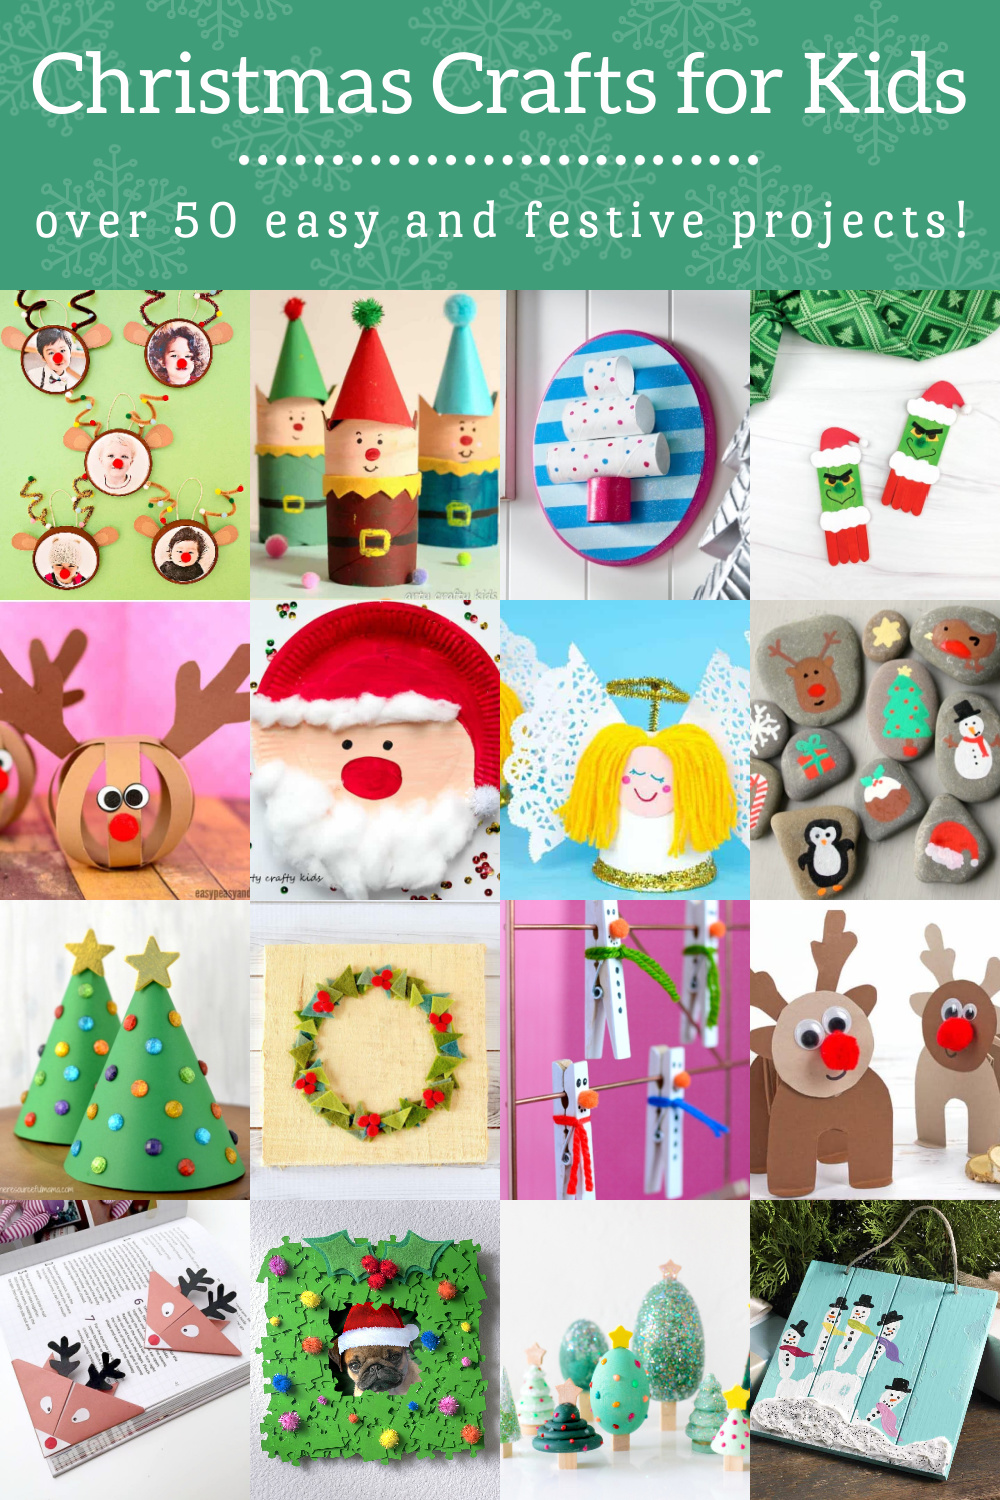 Best Christmas Crafts for Kids They'll Love! - Mod Podge Rocks